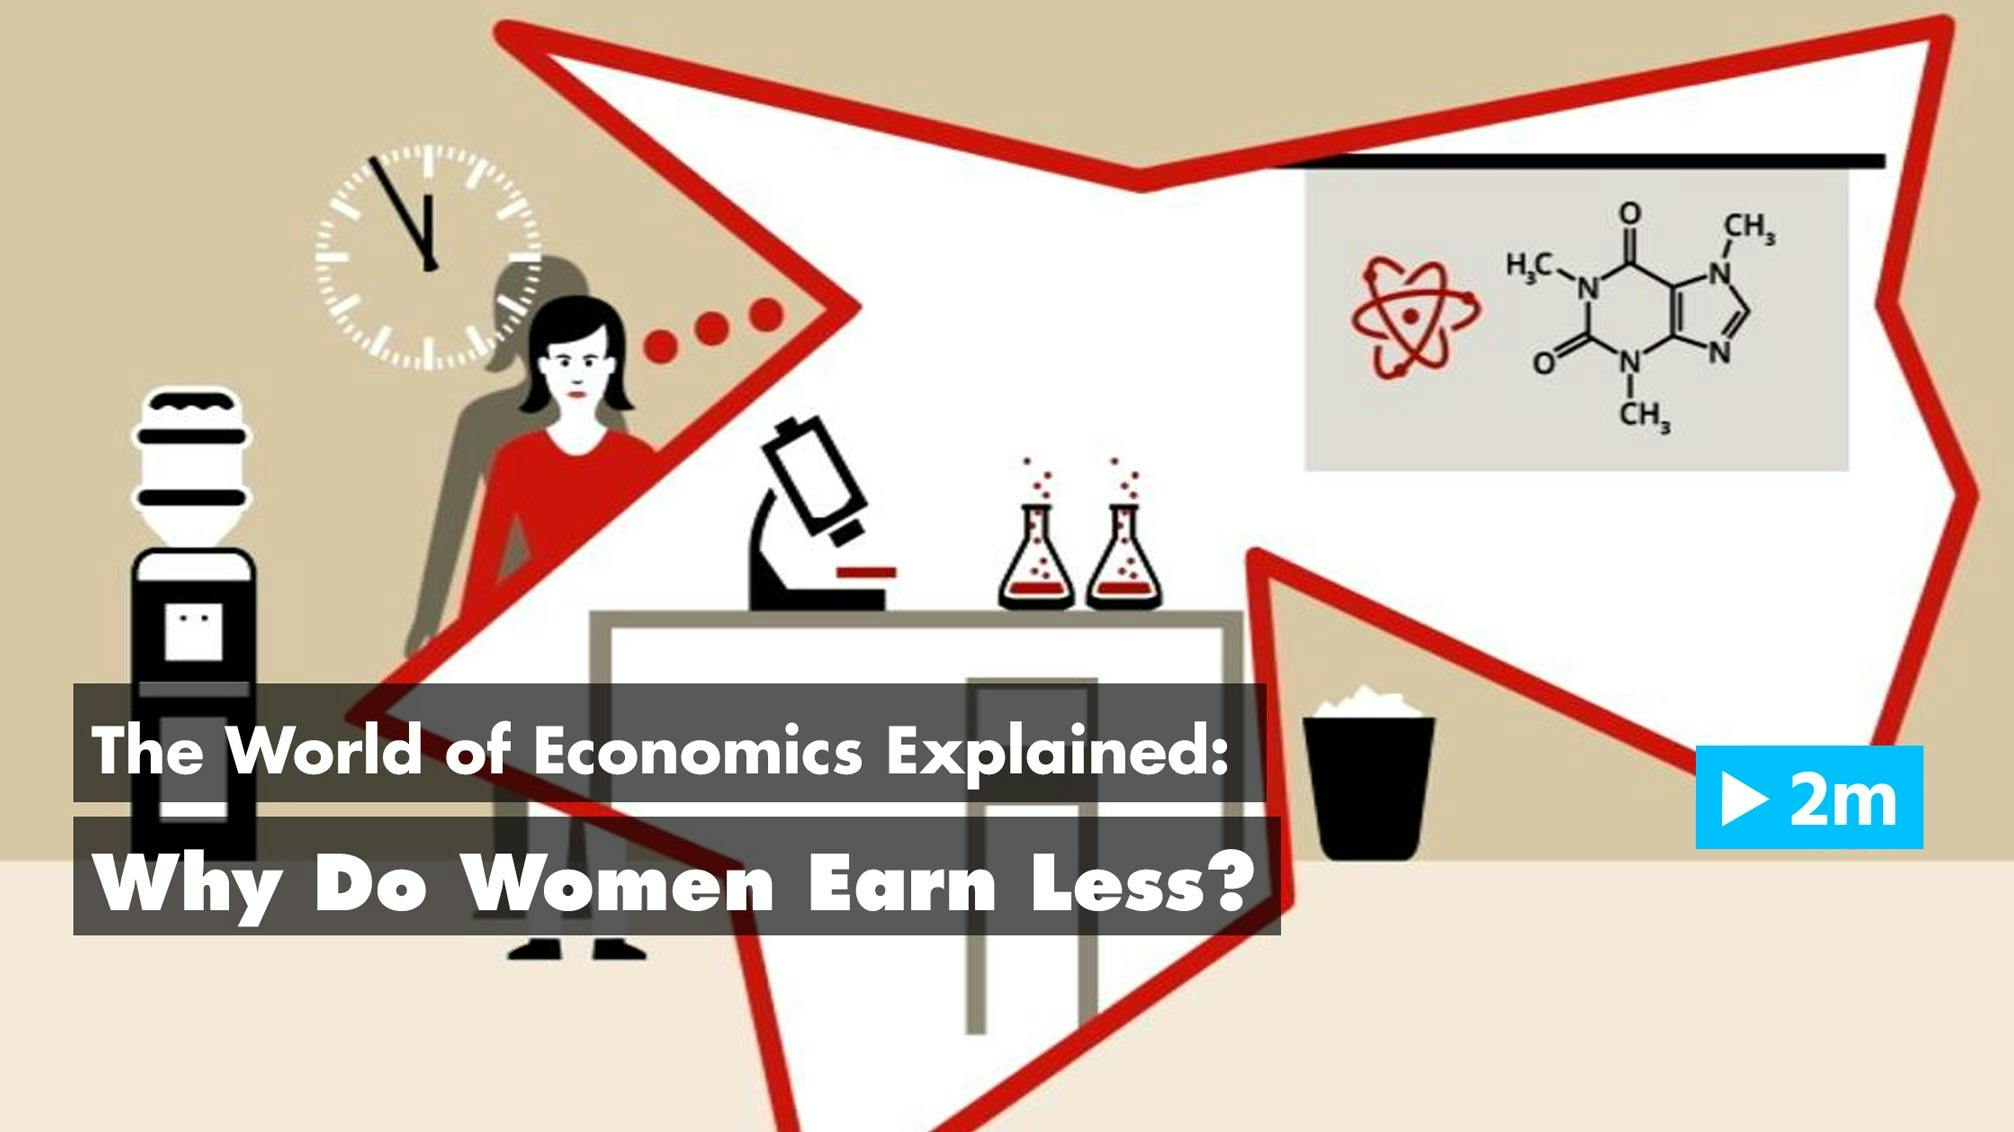 The World of Economics Explained: Why do women earn less?